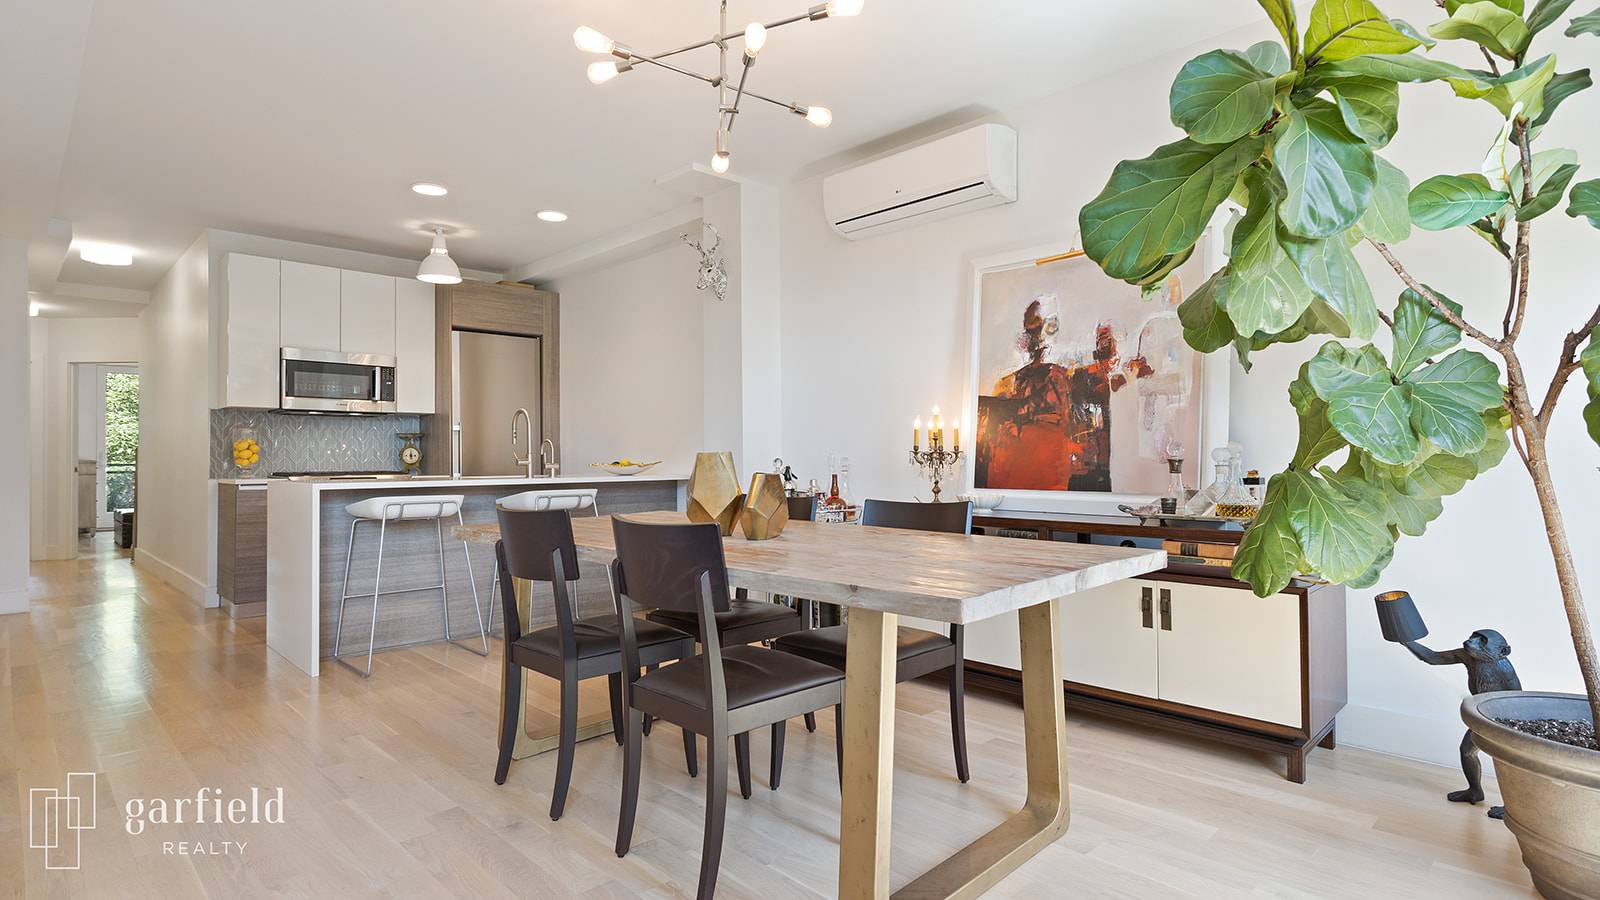 Welcome to the penthouse of your dreams in prime Park Slope.